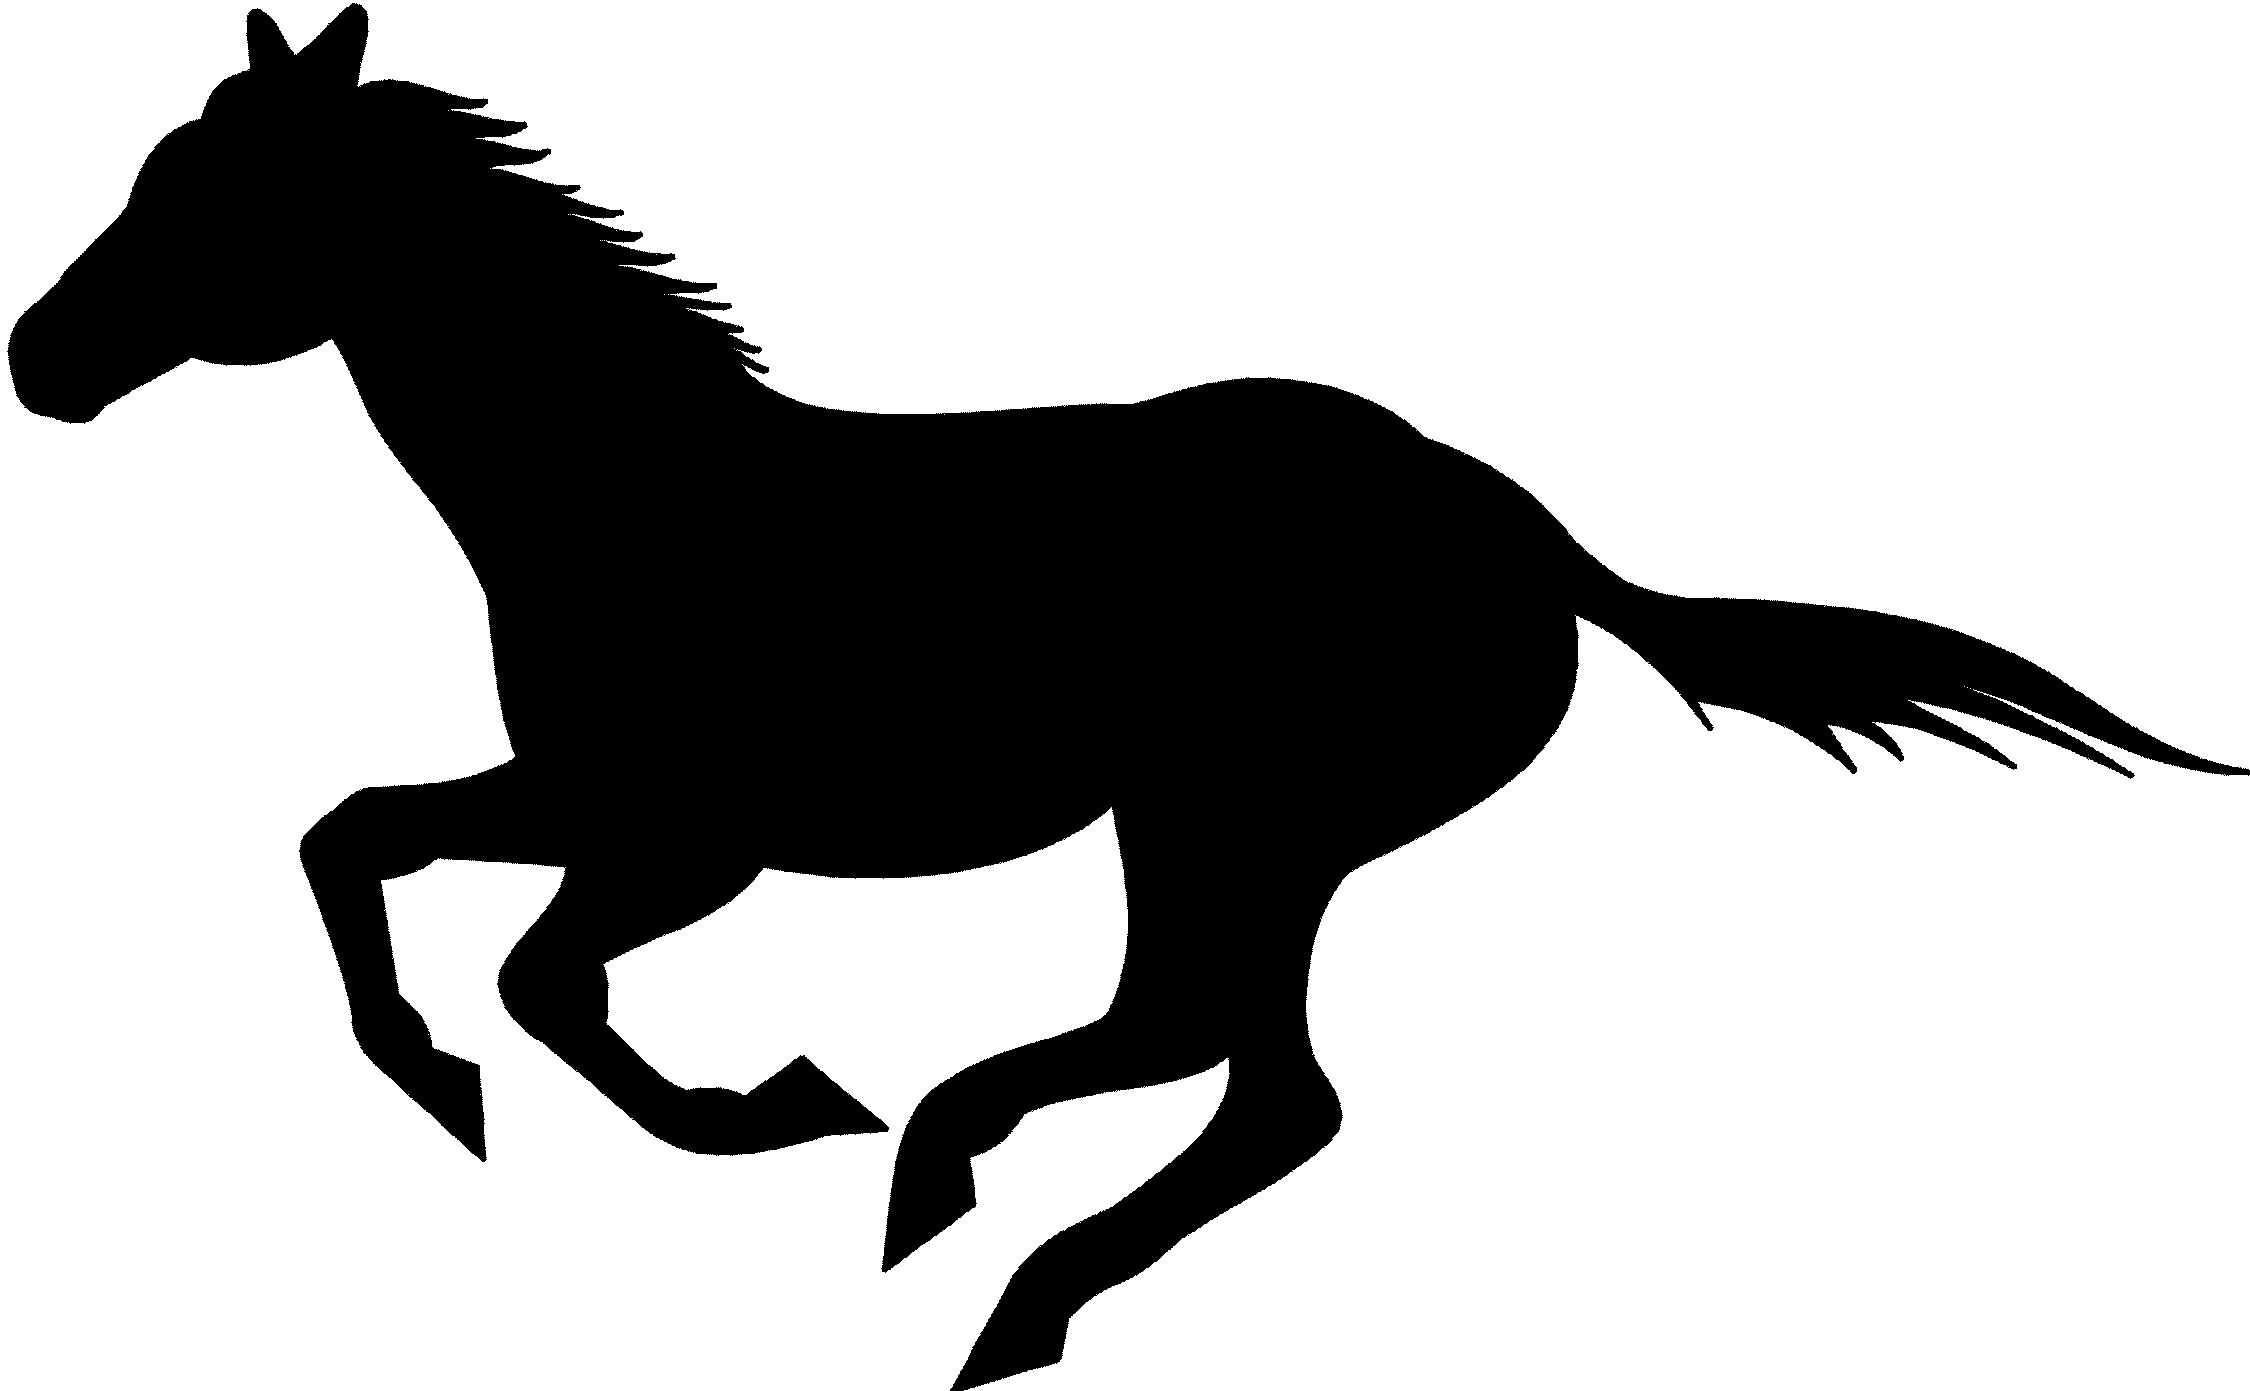 Running Stallion Silhouette Clipart | Free download on ClipArtMag